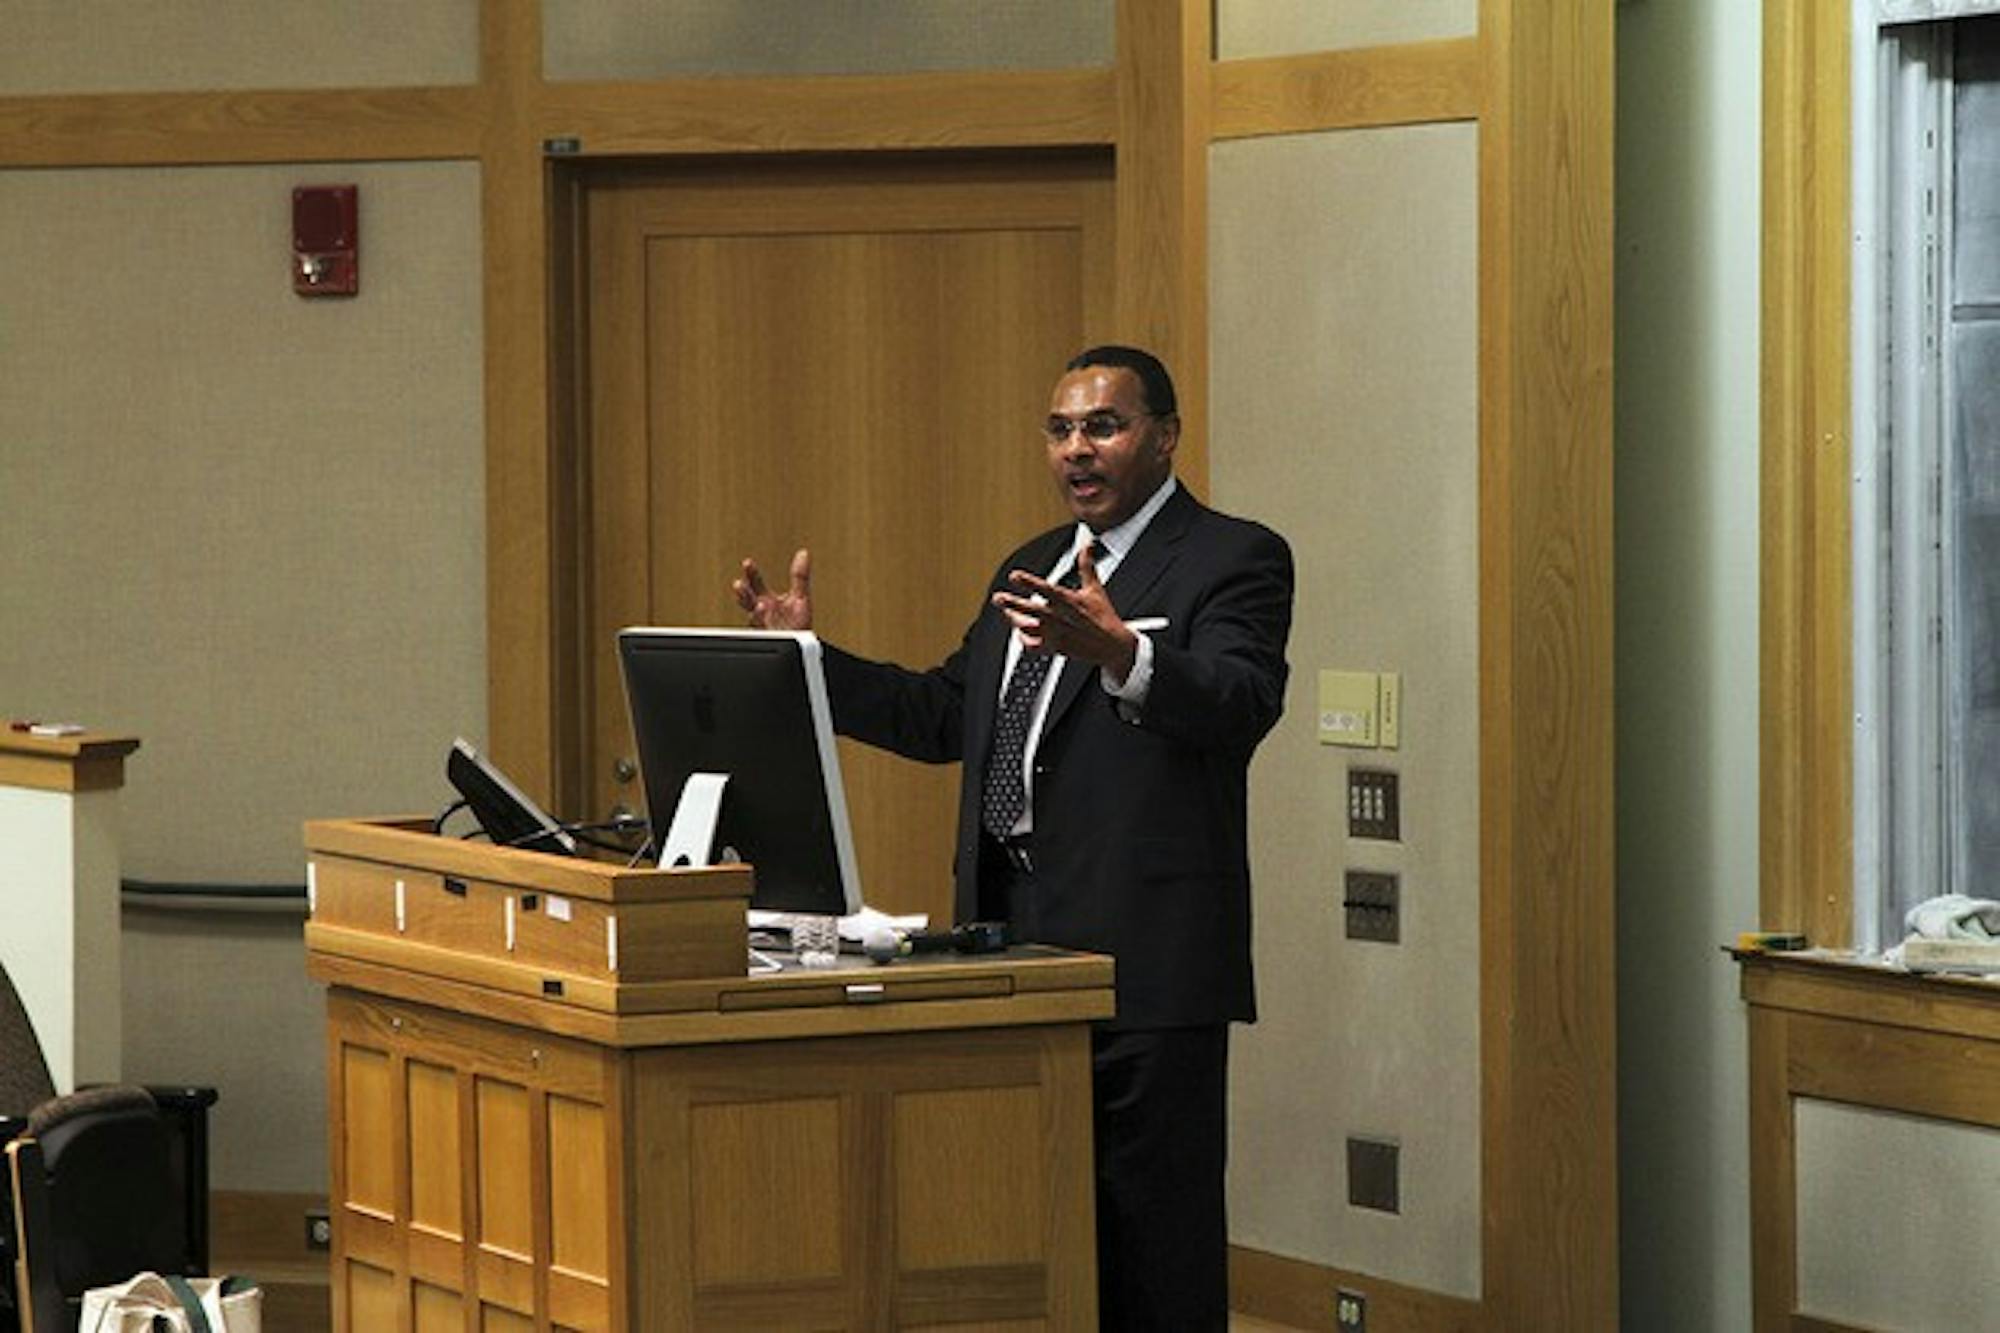 University of Maryland, Baltimore County President Freeman Hrabowski spoke about the importance of research and collaboration to higher education.